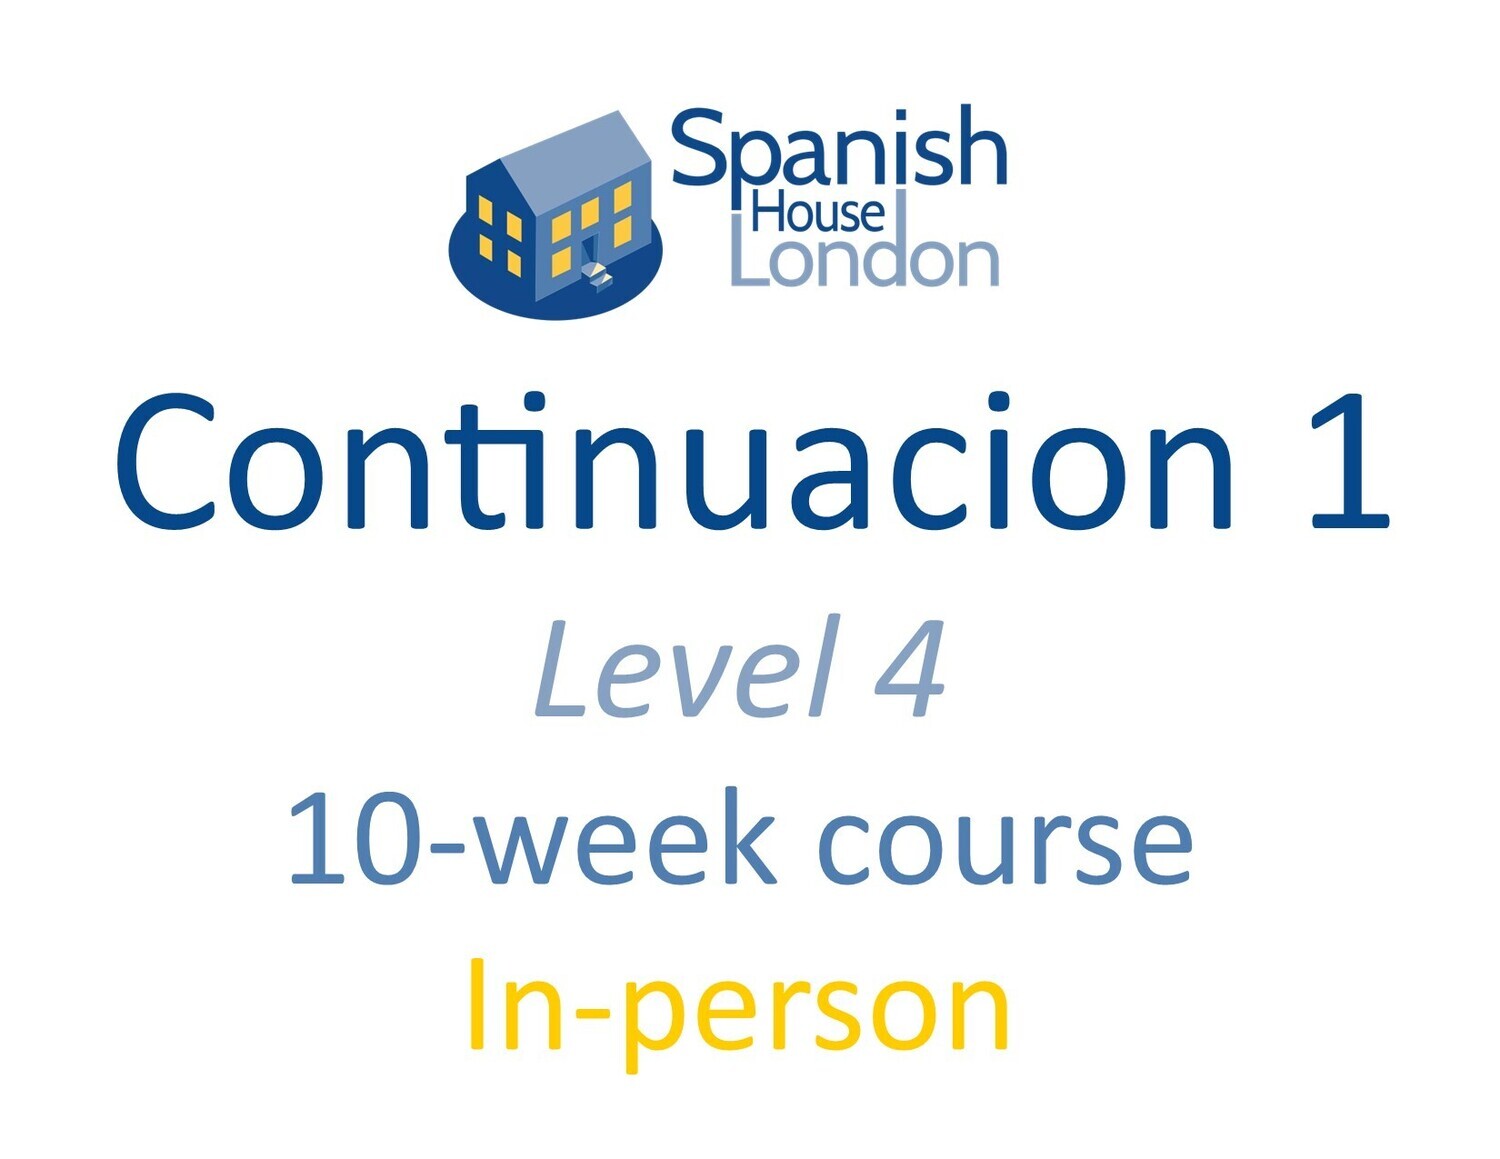 Continuacion 1 Course starting on 13th September at 6pm in Clapham North